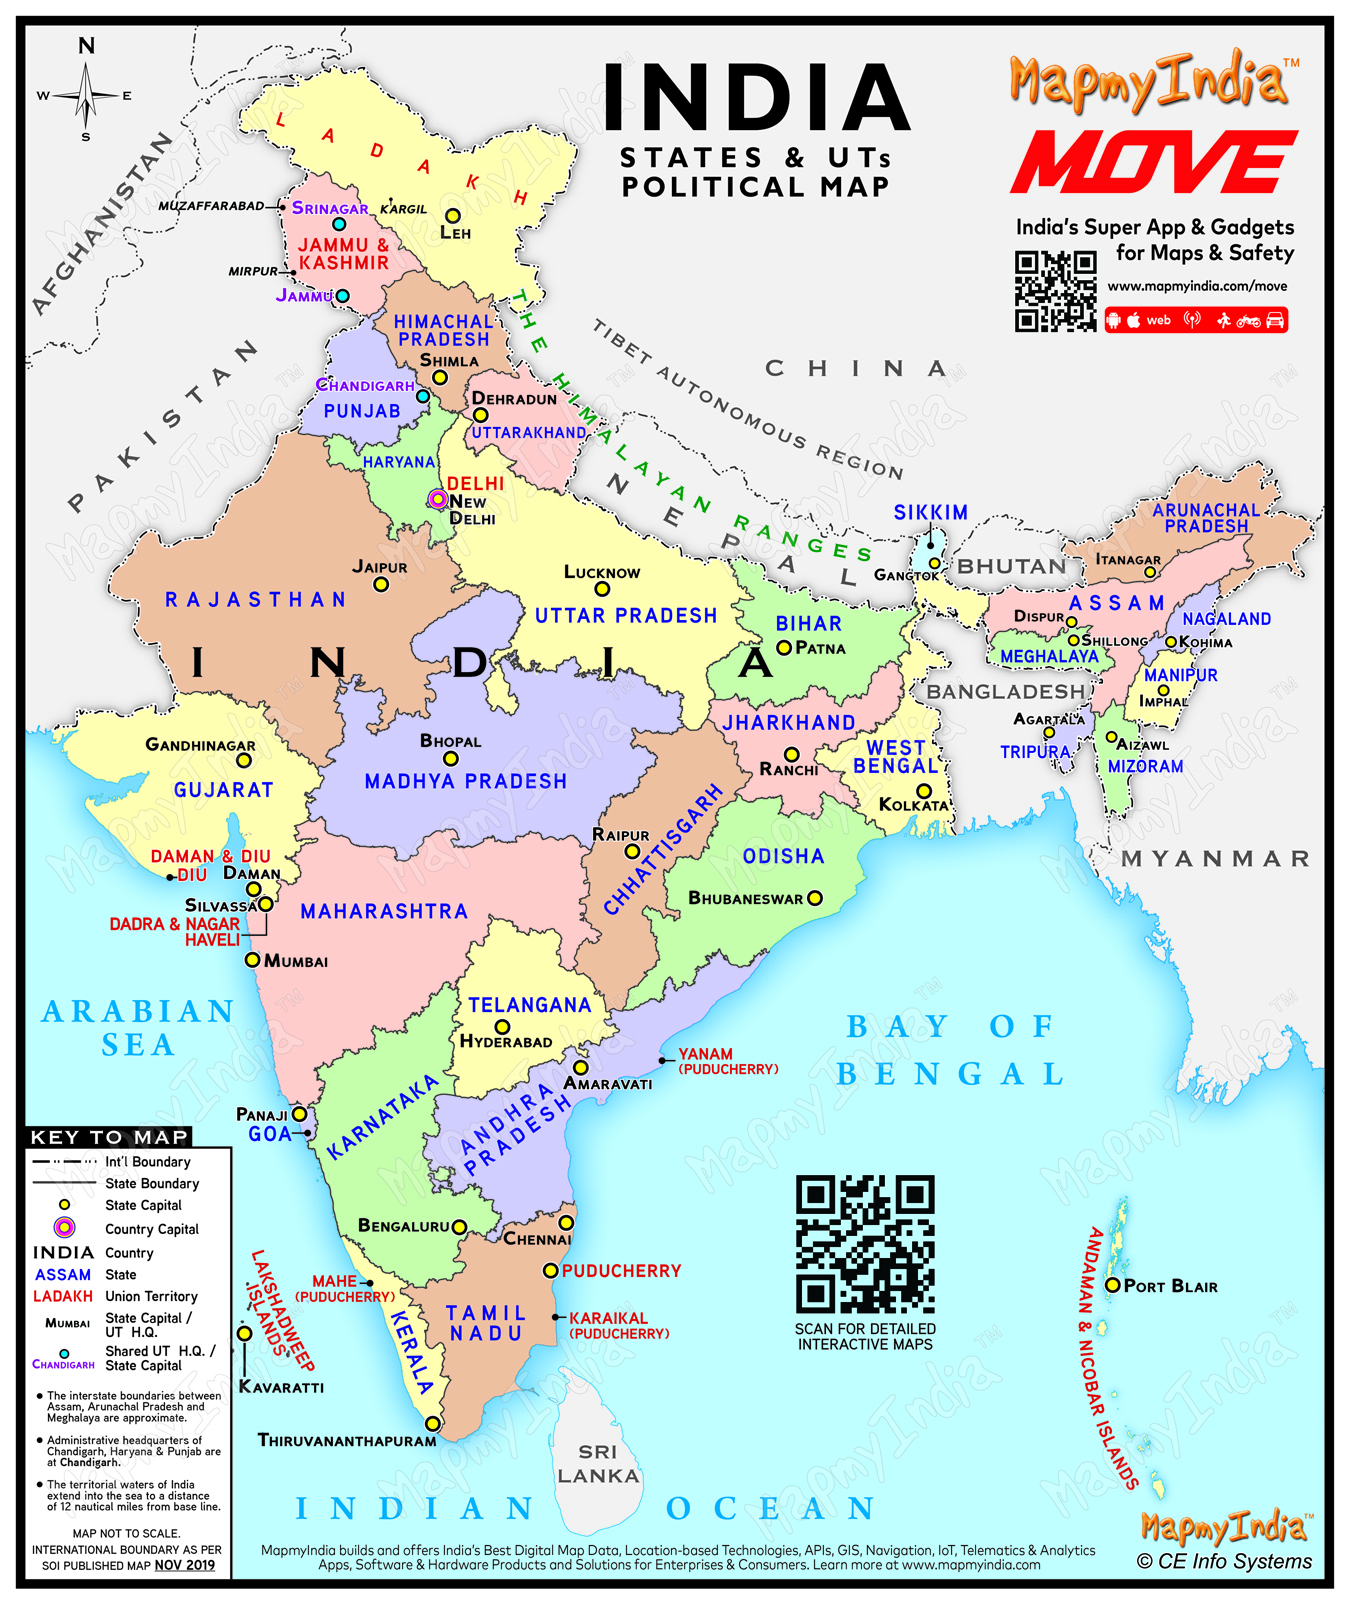 Download Indian Political Map Download The Latest Political Map of India | MapmyIndia